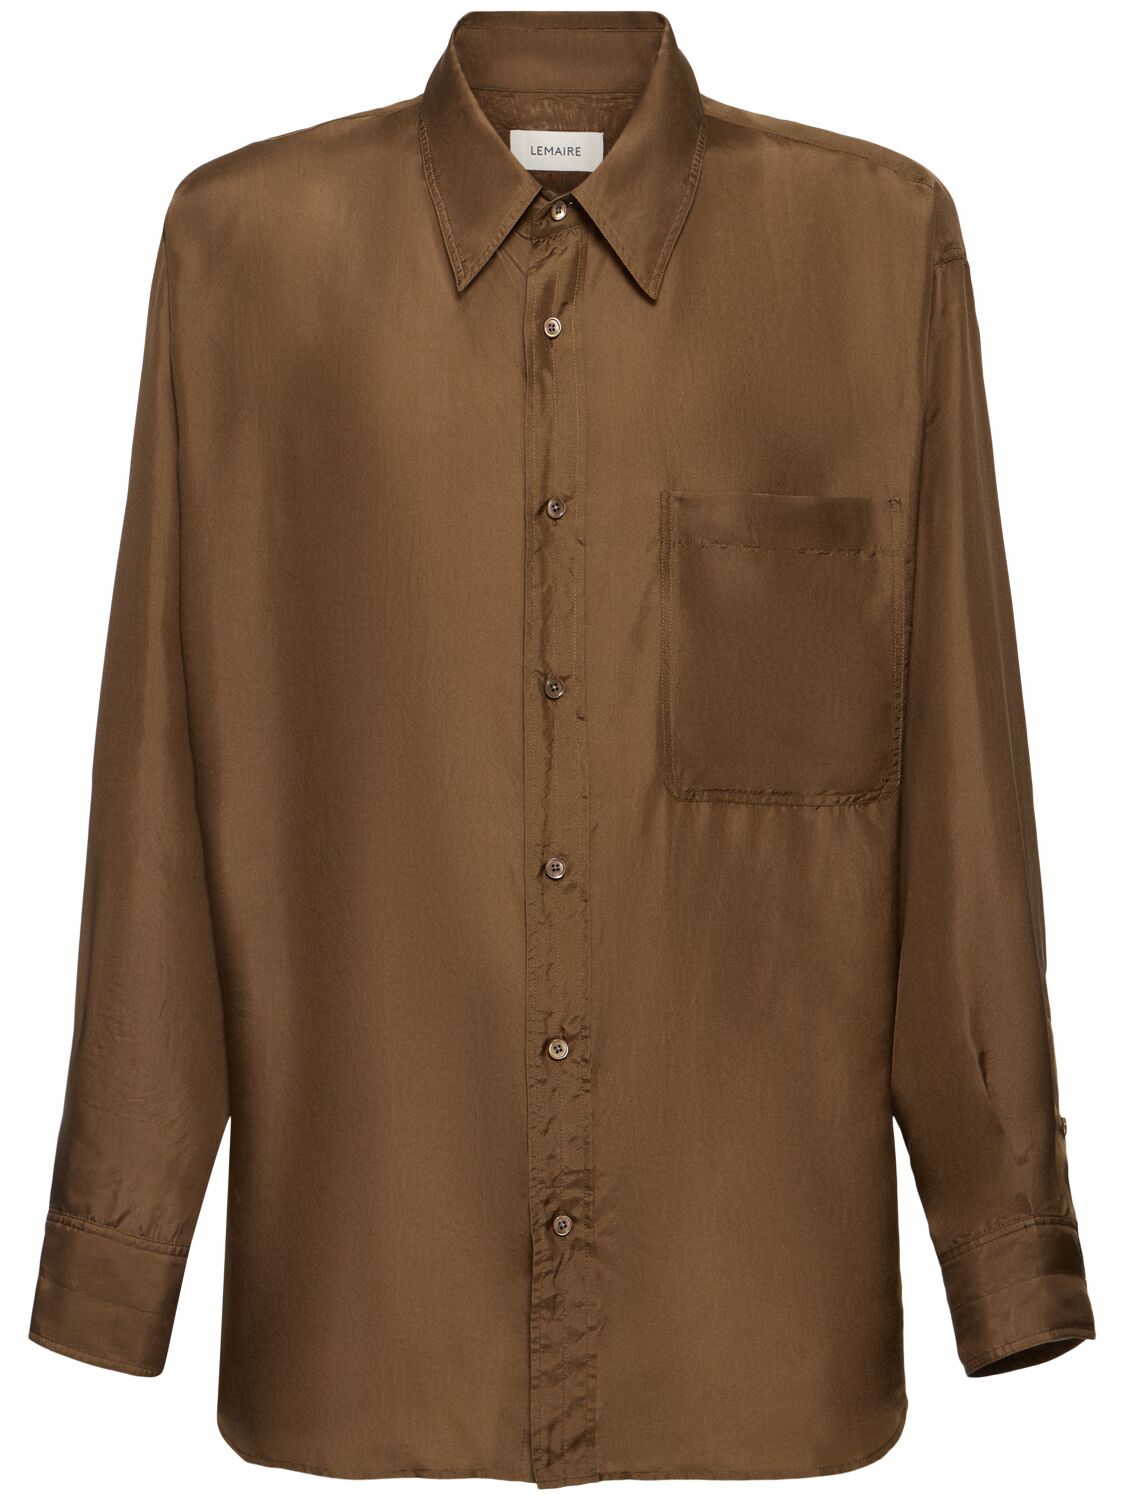 Lemaire Silk Shirt In Tobacco